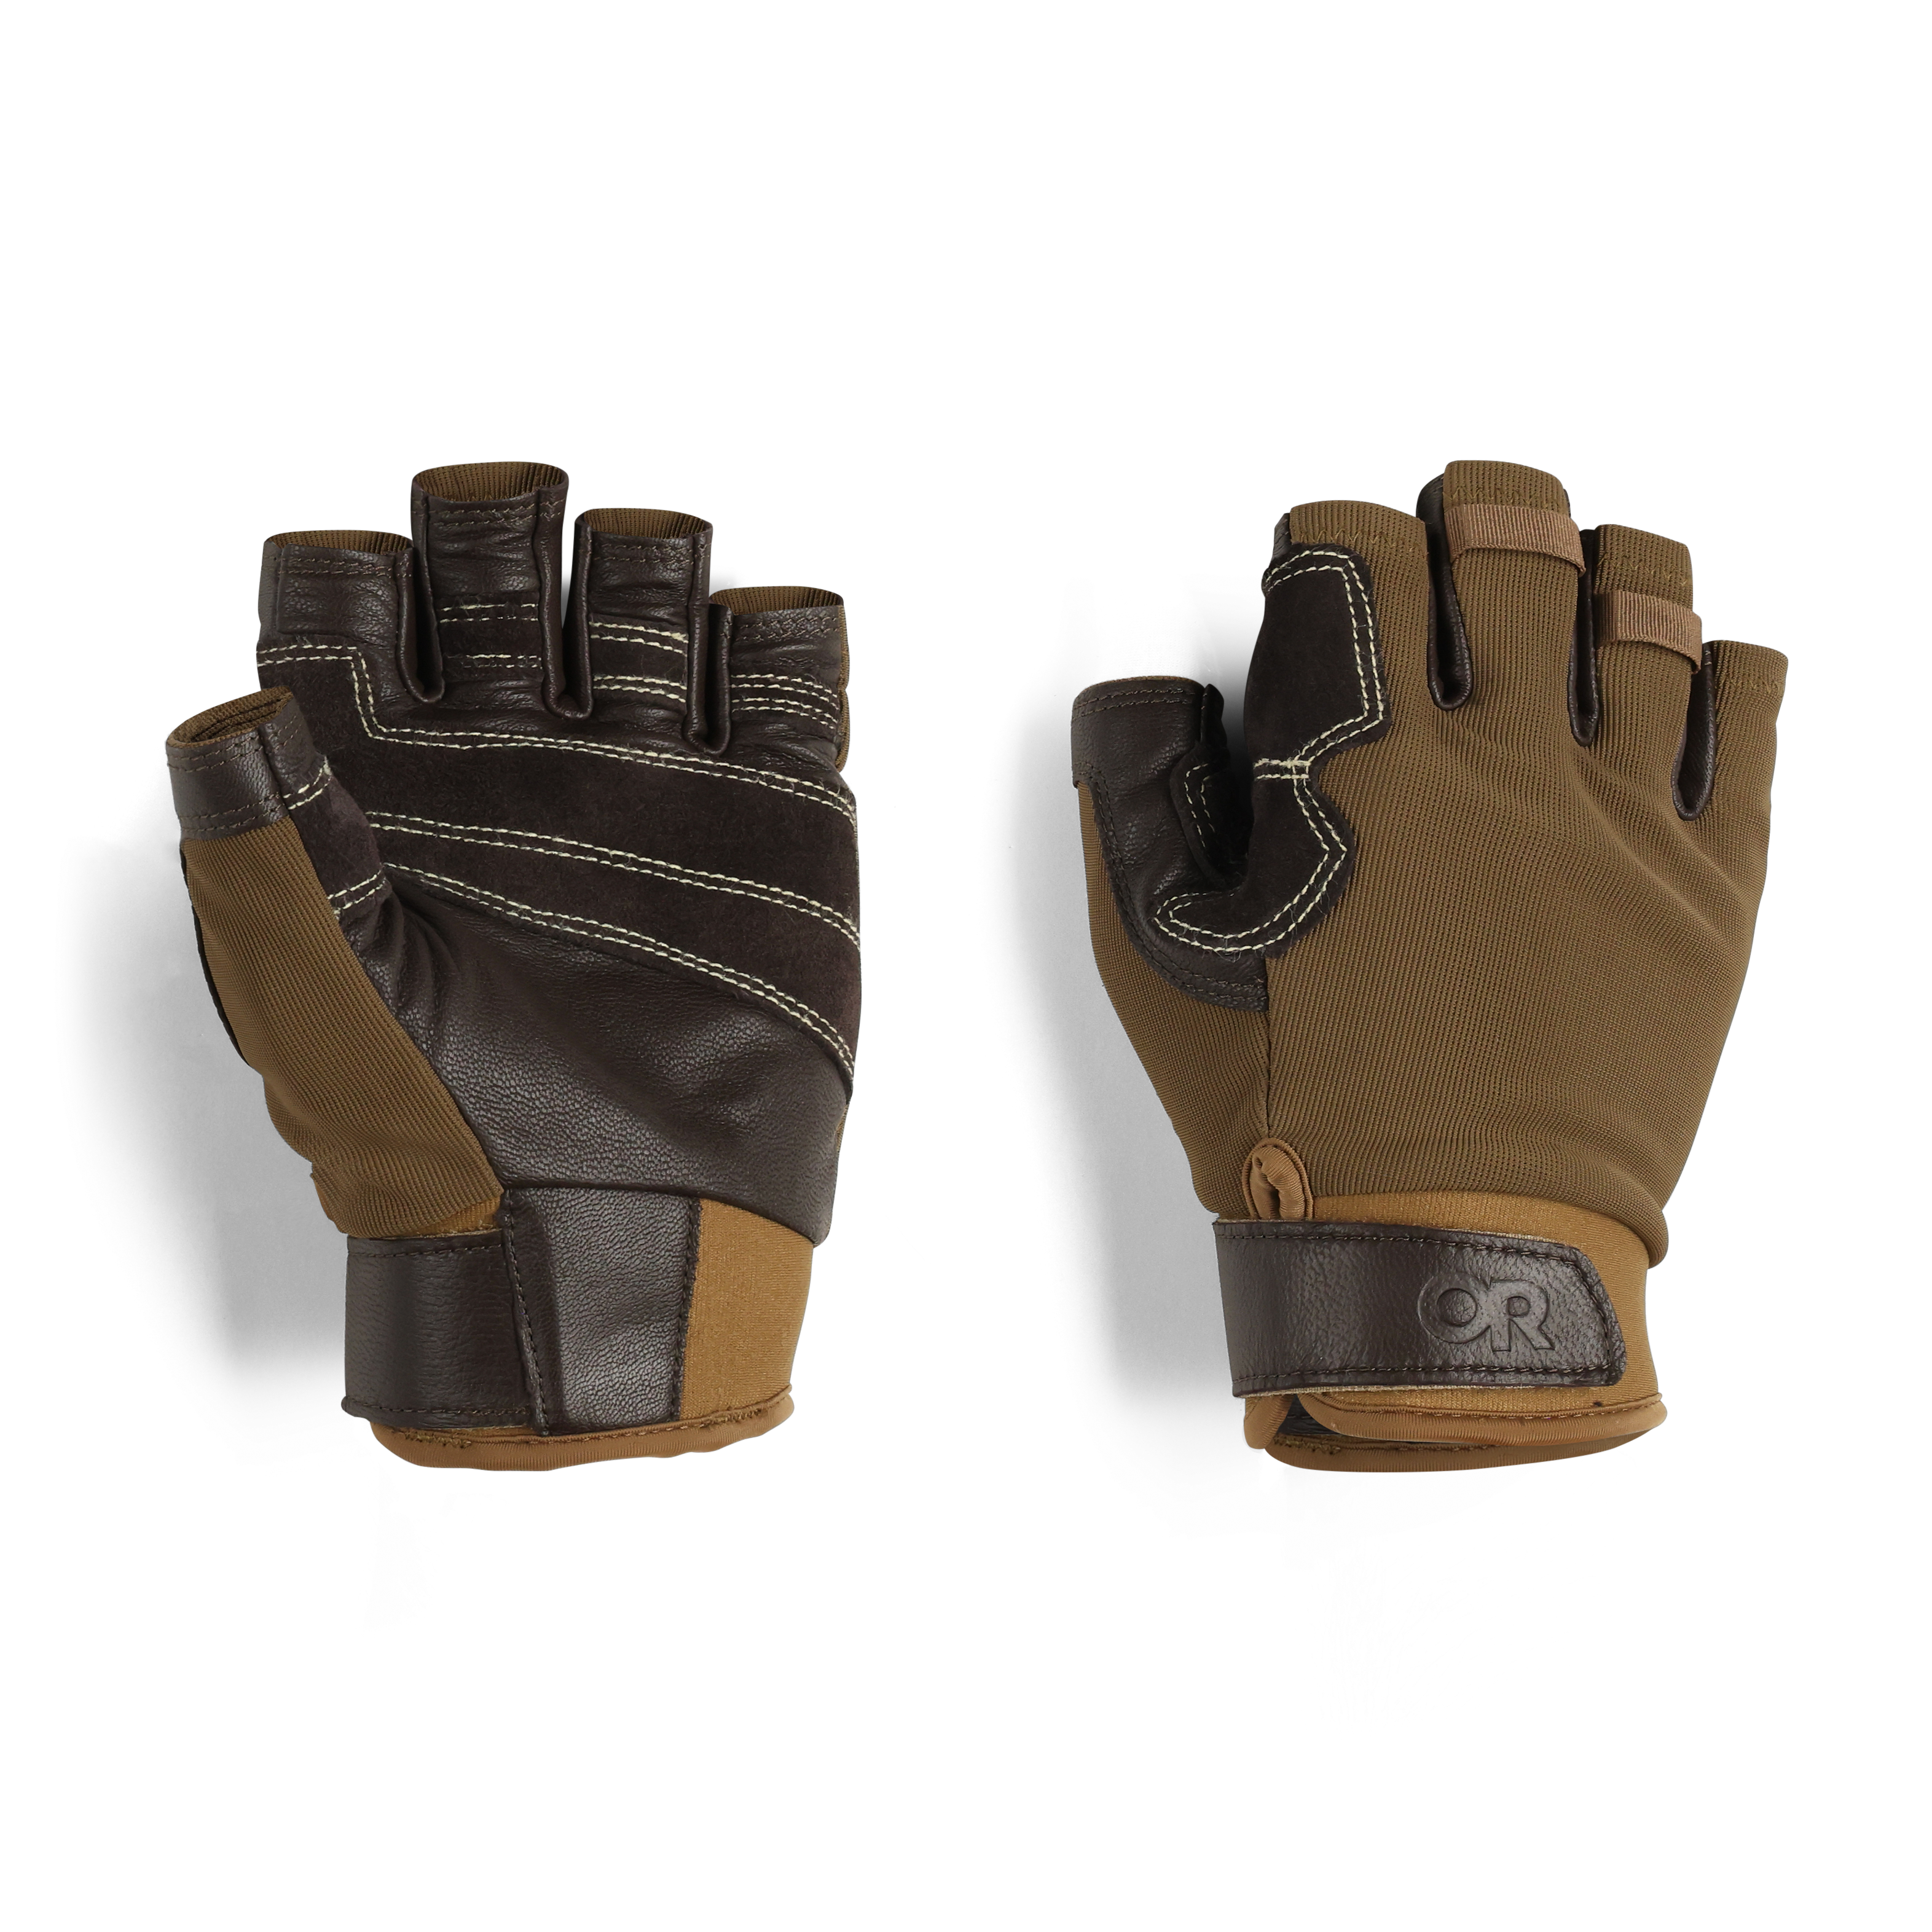 Outdoor Research Fossil Rock II Climbing Gloves